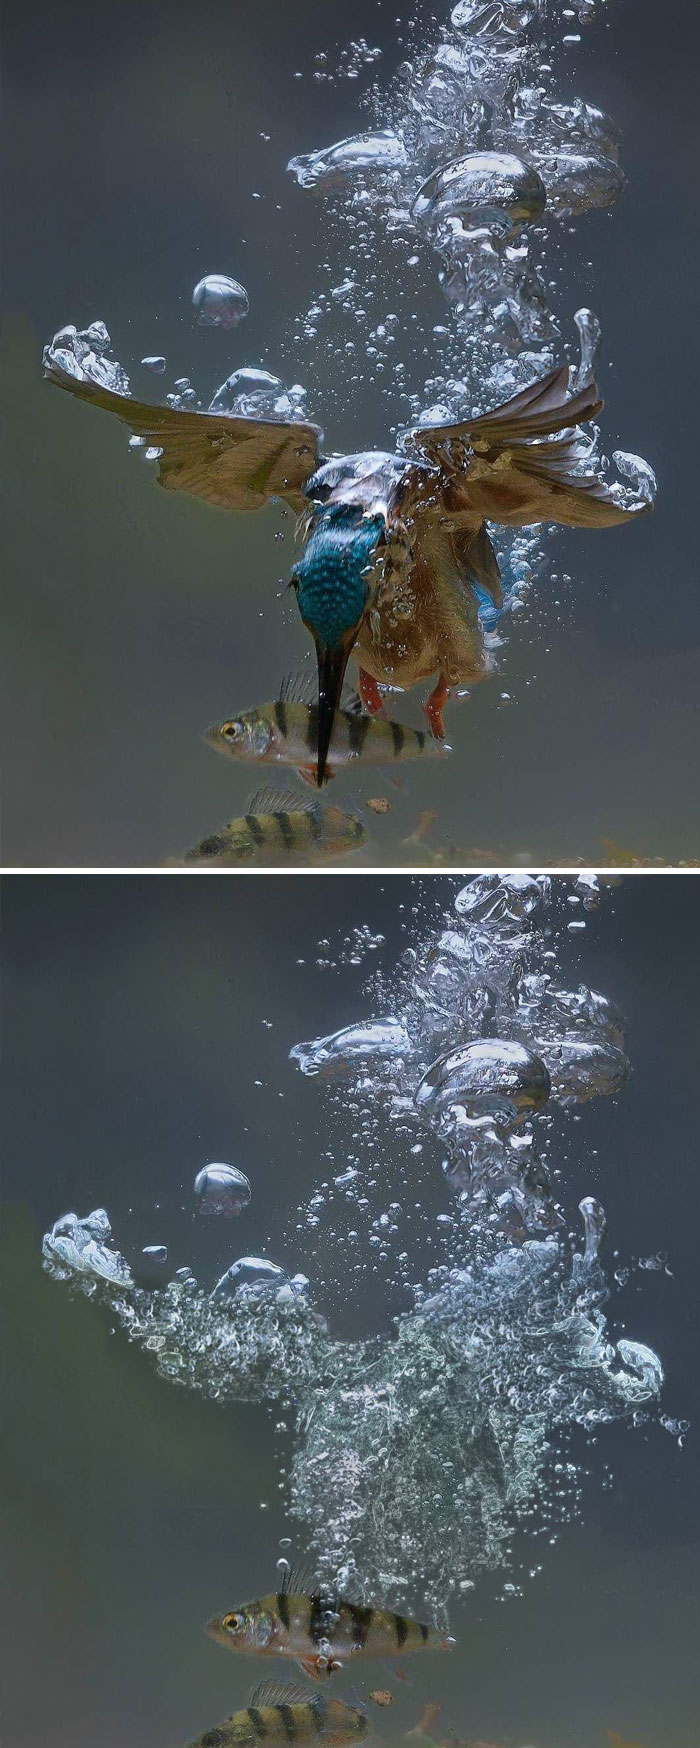 Kingfisher Attacking A Fish Underwater